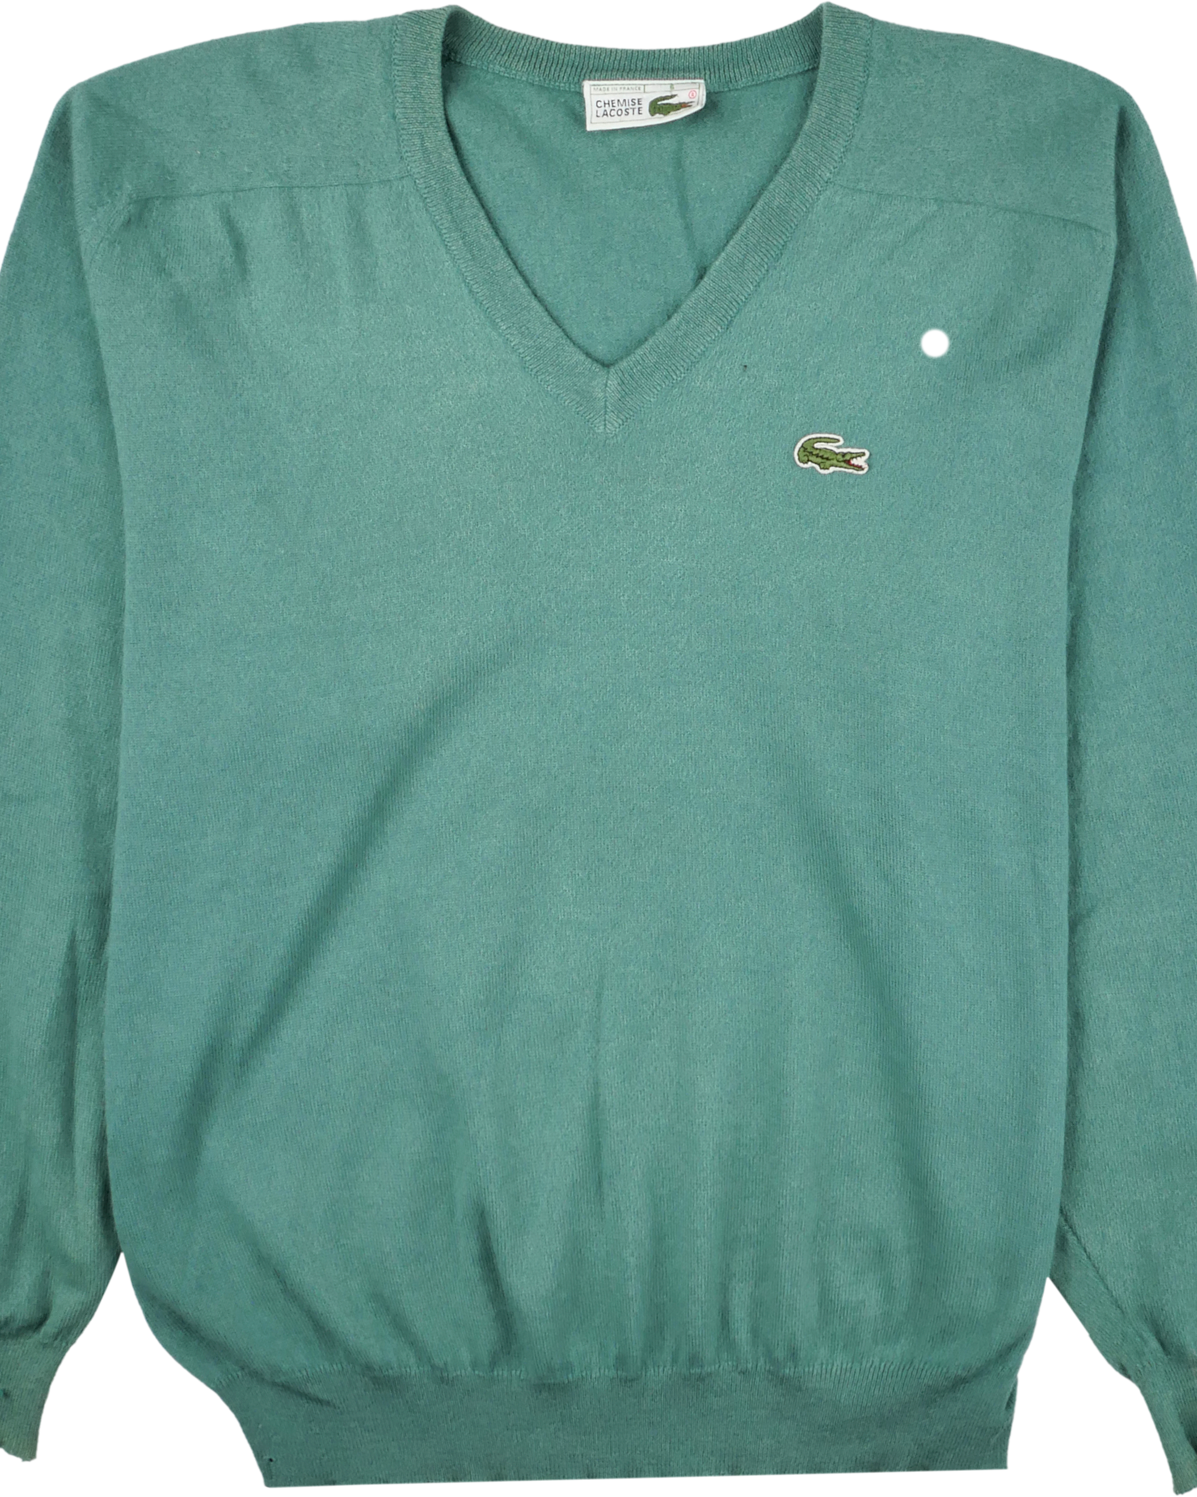 Lacoste Woll Pullover grün